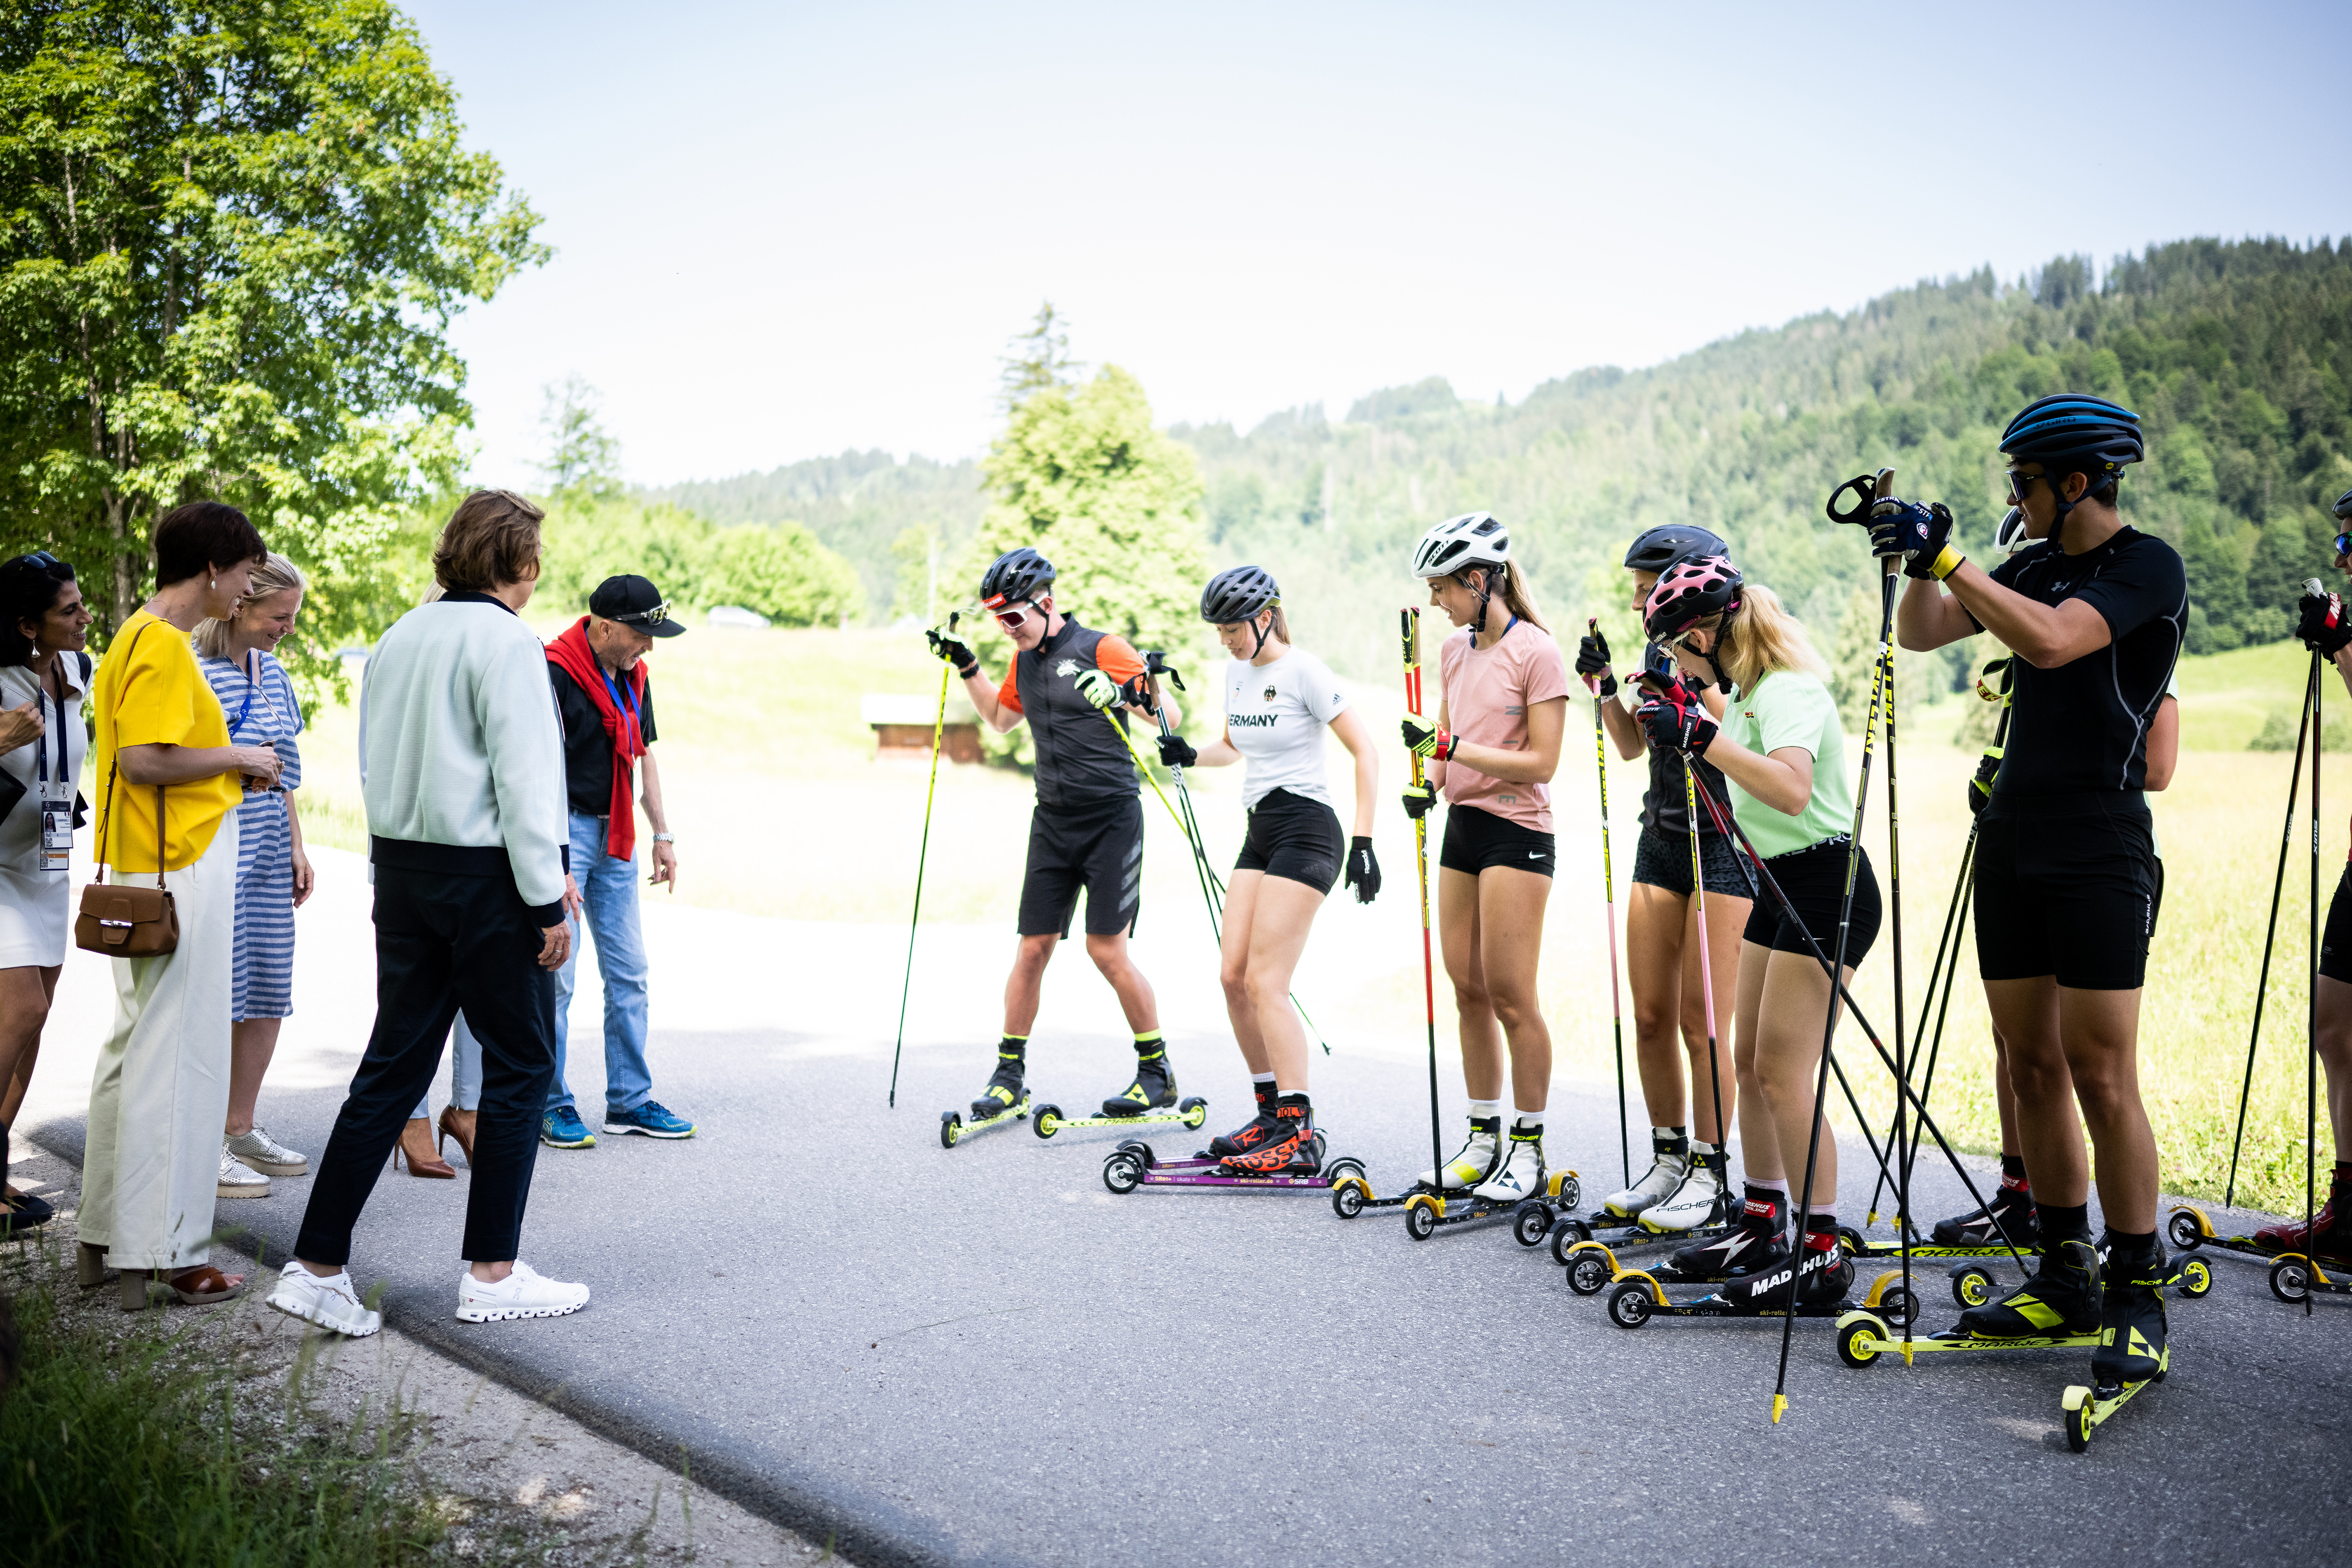 Christian Neureuther and young Olympic hopefuls demonstrate roller skiing as part of the G7 partner programme.